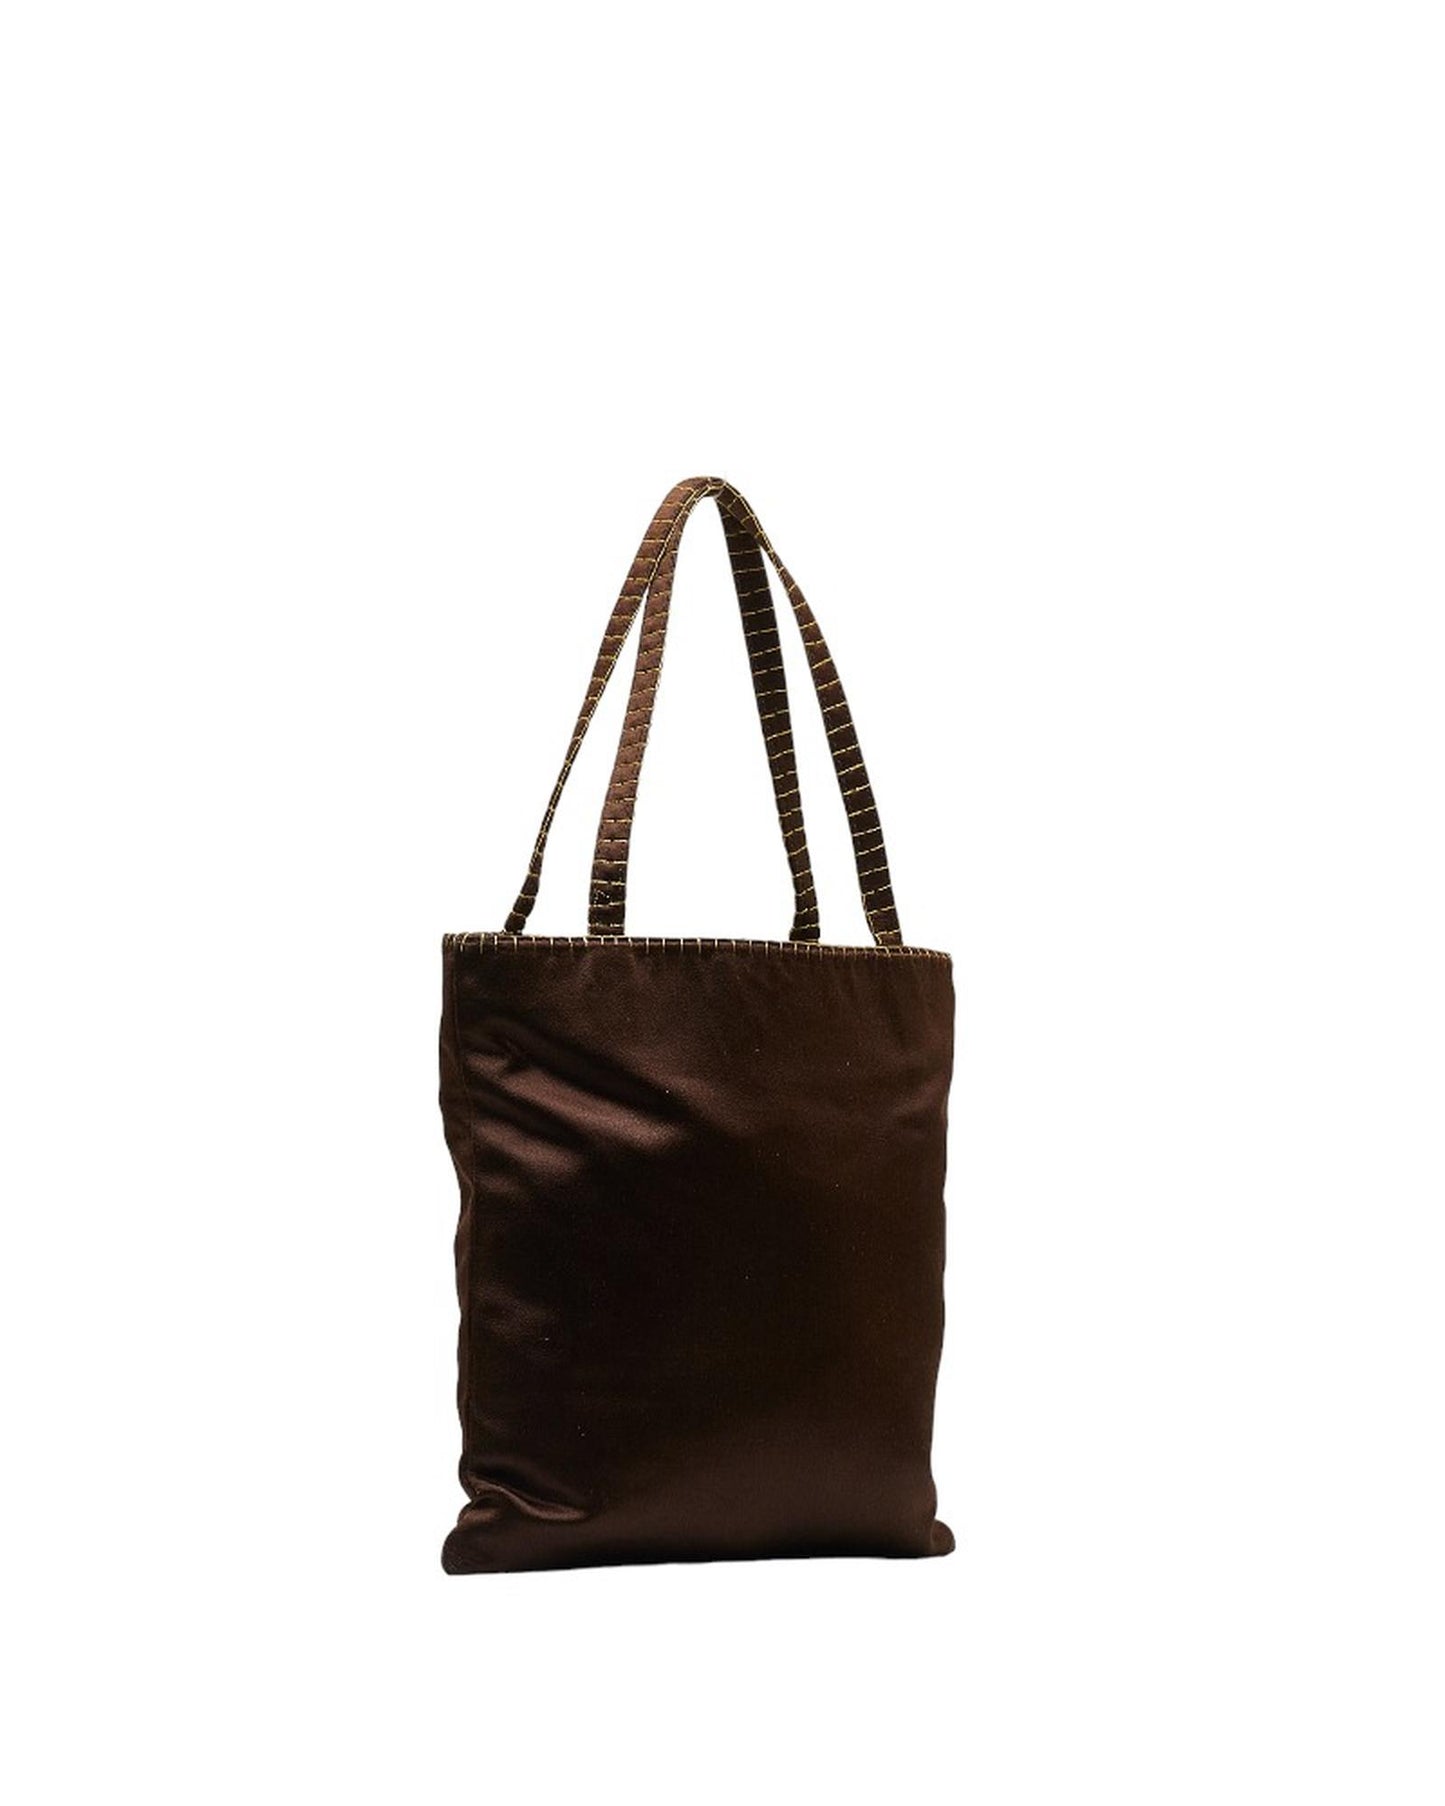 Prada Women's Brown Tote Bag in Excellent Condition in Brown